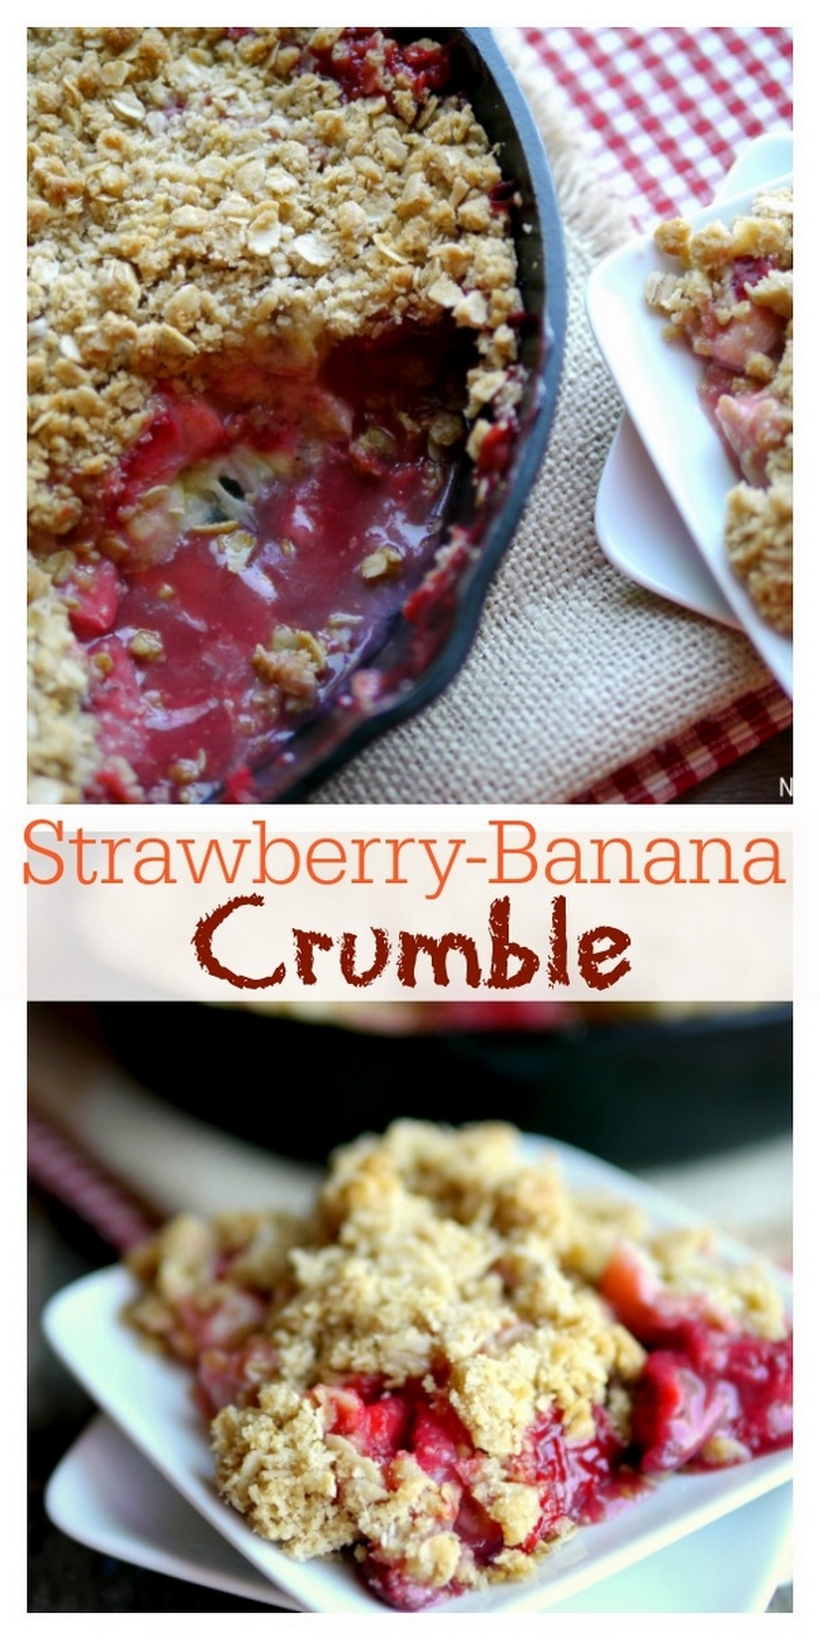 Strawberry-Banana Crumble in text with two photos of the crumble, one in the pan another on a plate.